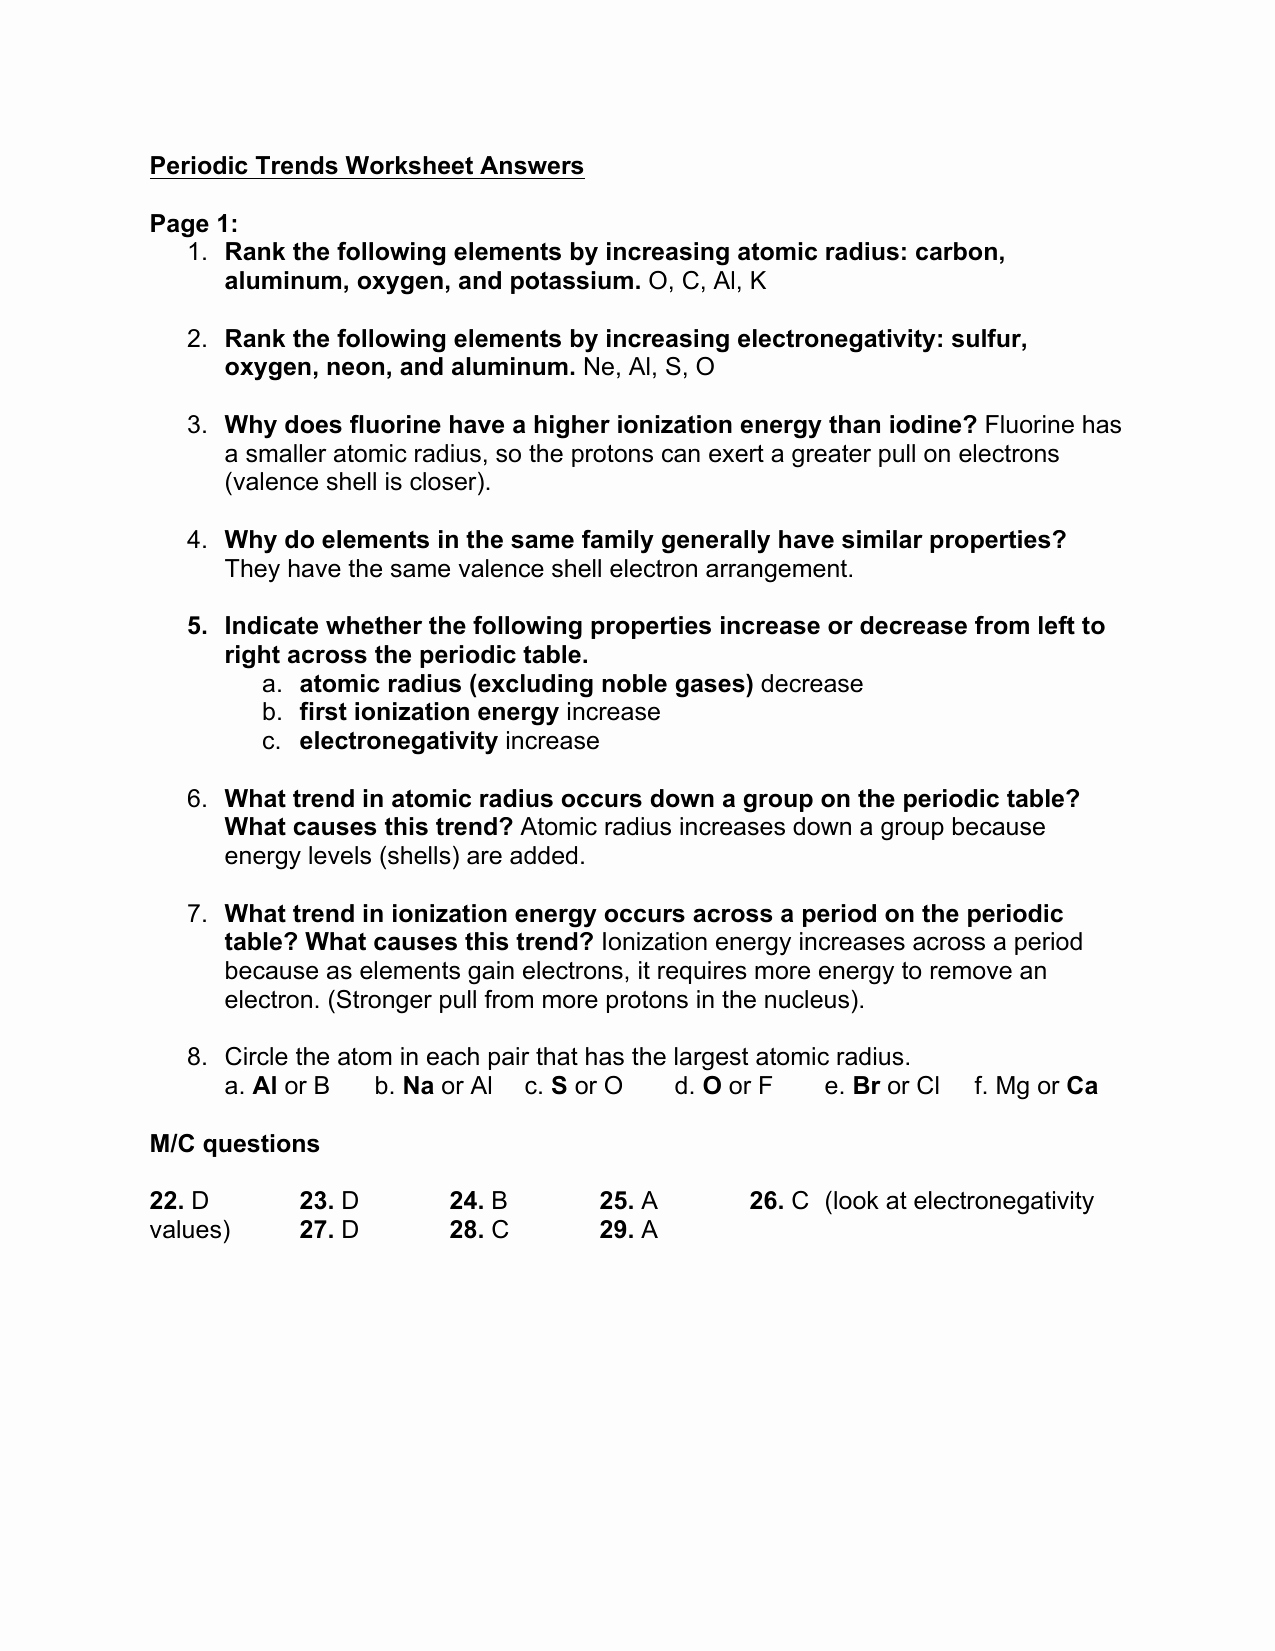 Periodic Trends Worksheet Answer Key Inspirational Periodic Trends Ionization Energy Chem Worksheet 6 4